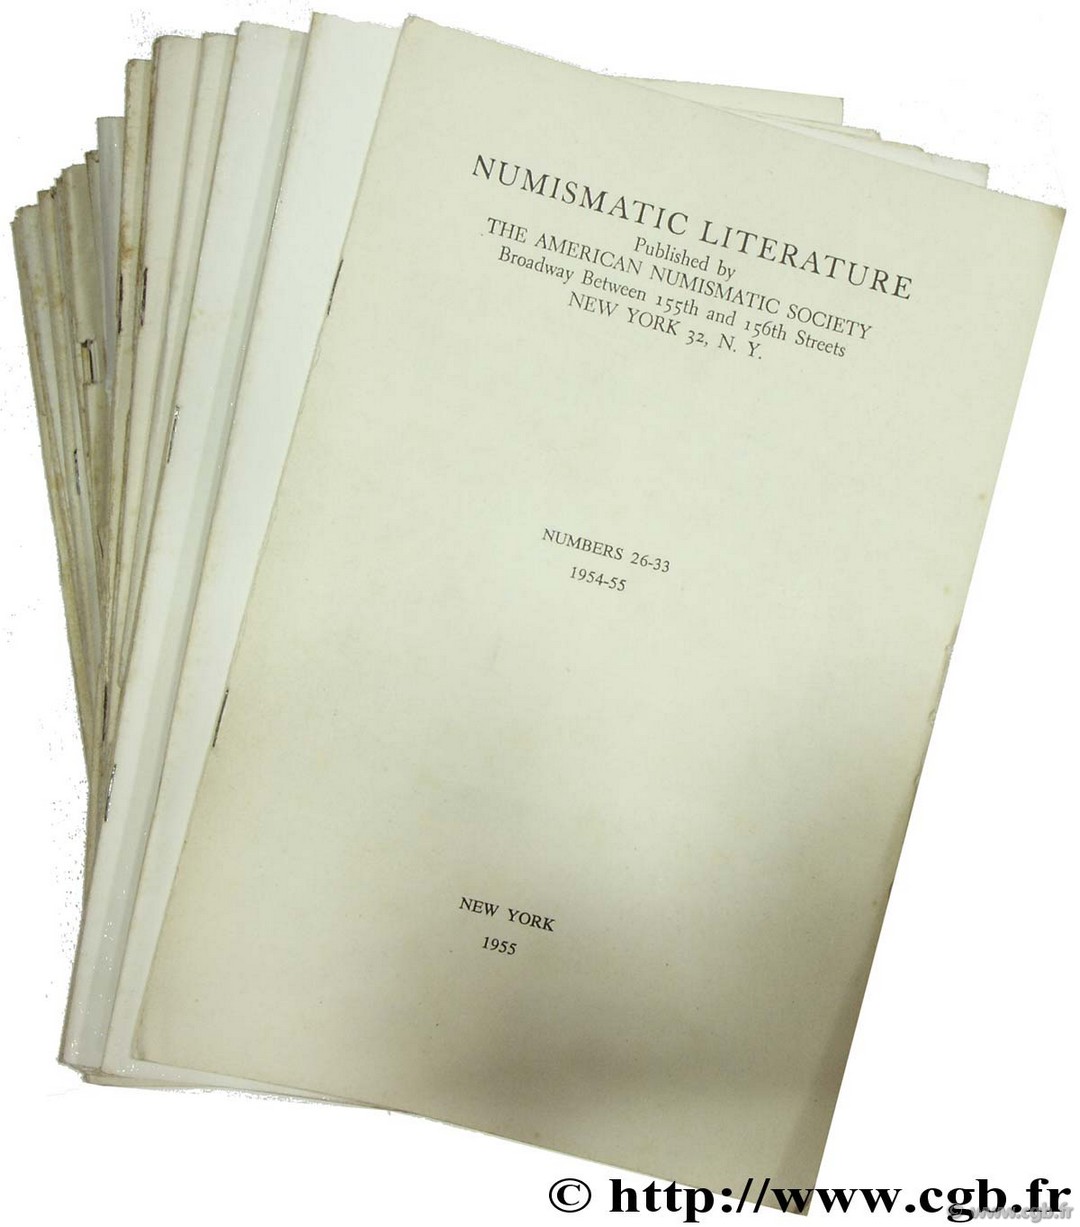 Numismatic literature published by tne American numismatic society 